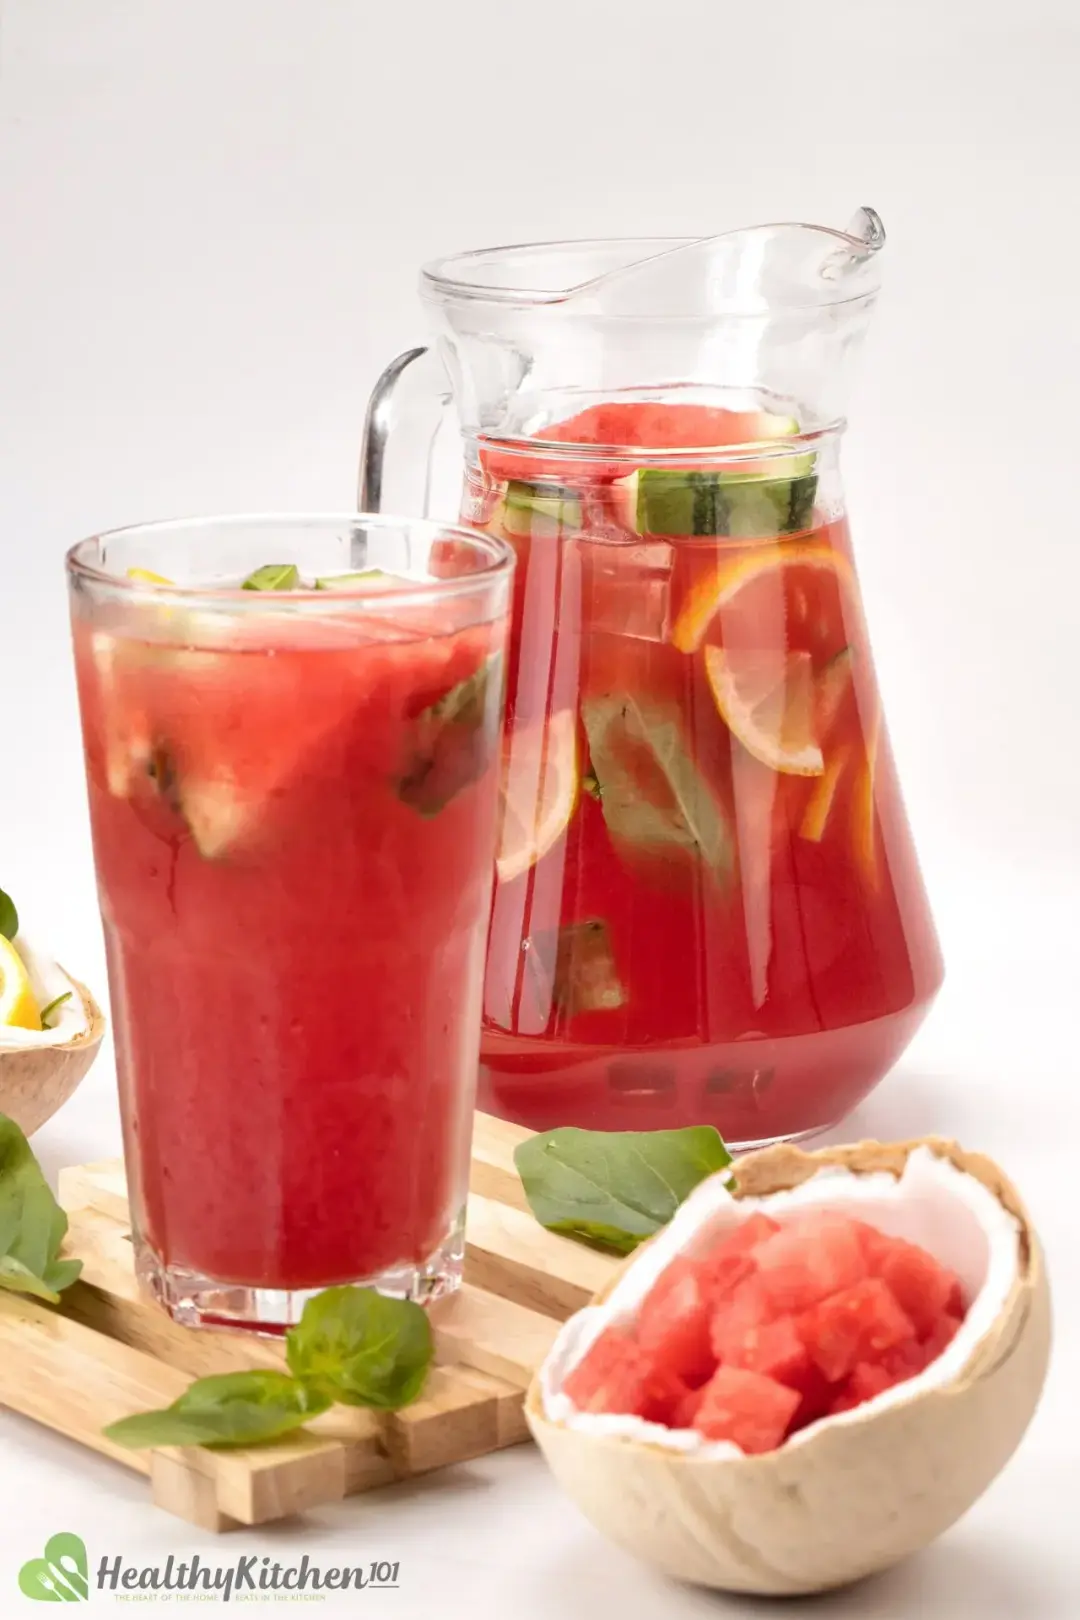 A jug and a glass of watermelon juice placed on a wooden board next to a coconut shell with watermelon cubes